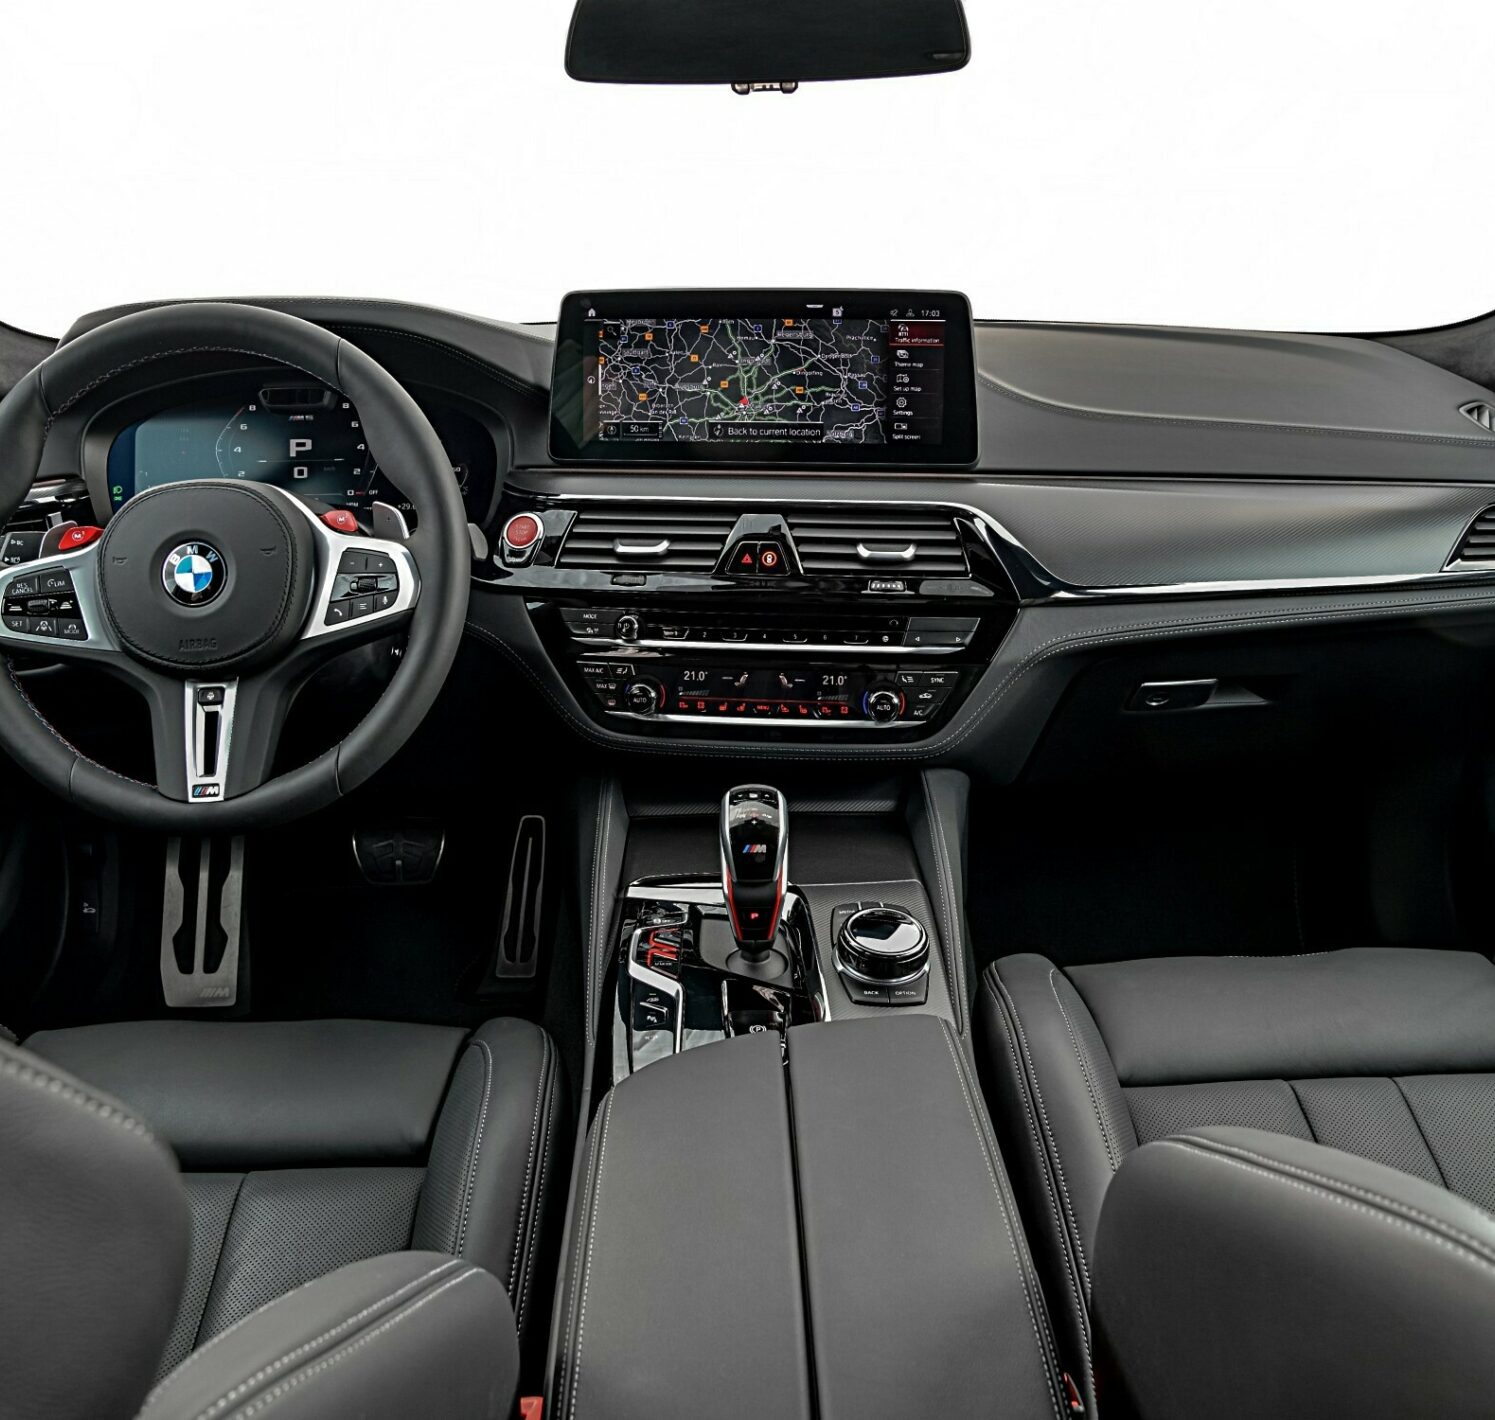 https://autofilter.sk/assets/images/rad-5/gallery/P90390738_lowRes_the-new-bmw-m5-compe.jpg - obrazok